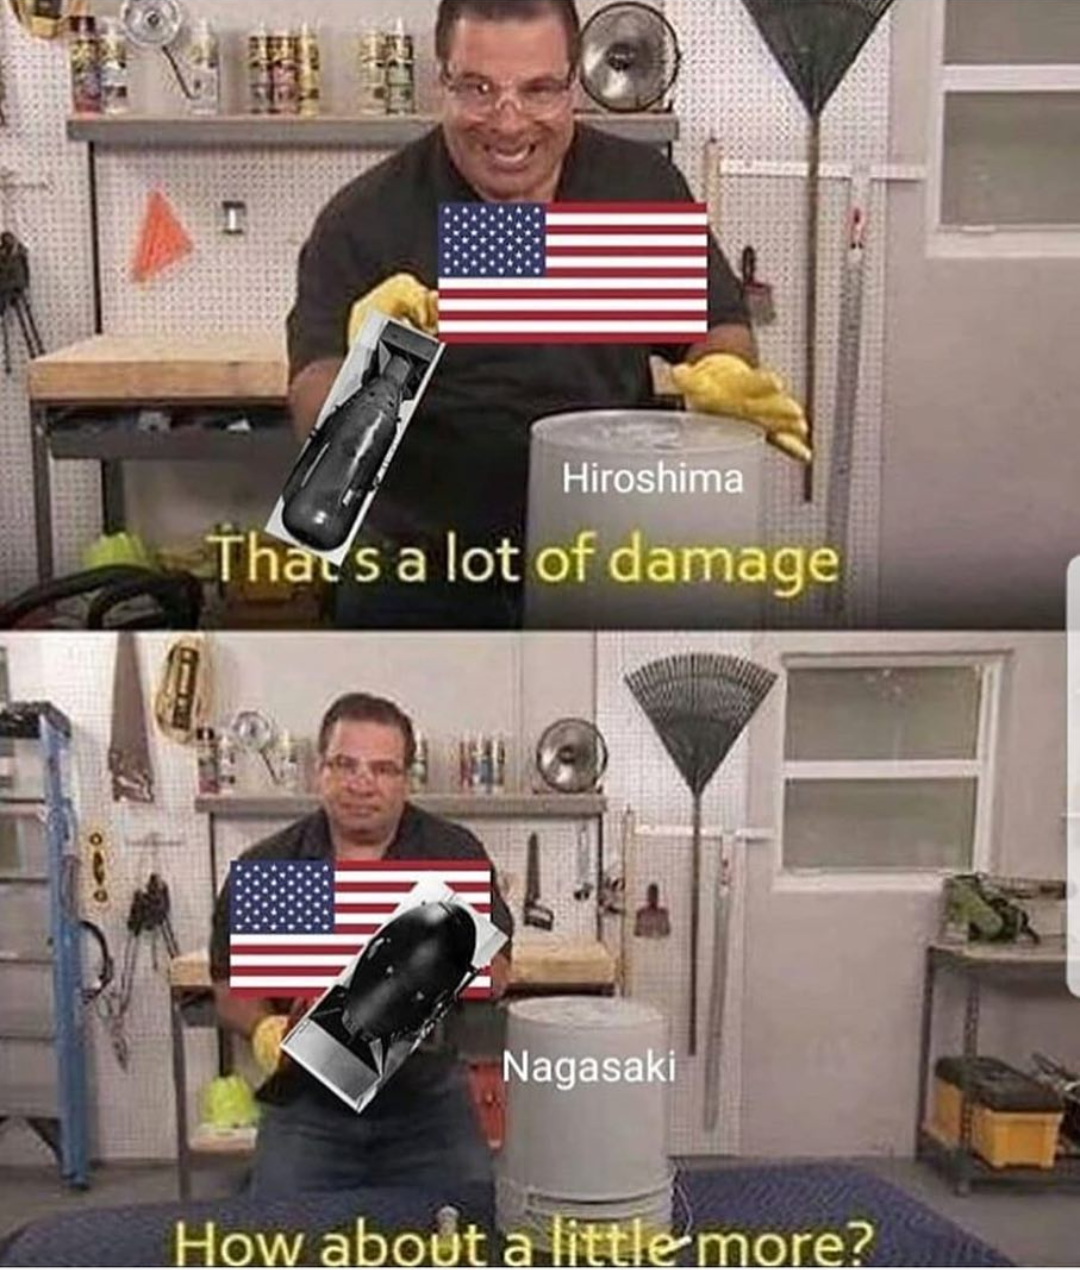 Offensive Meme - thats alot of damage meme - Hiroshima There's a lot of damage Nagasaki How about a little more?